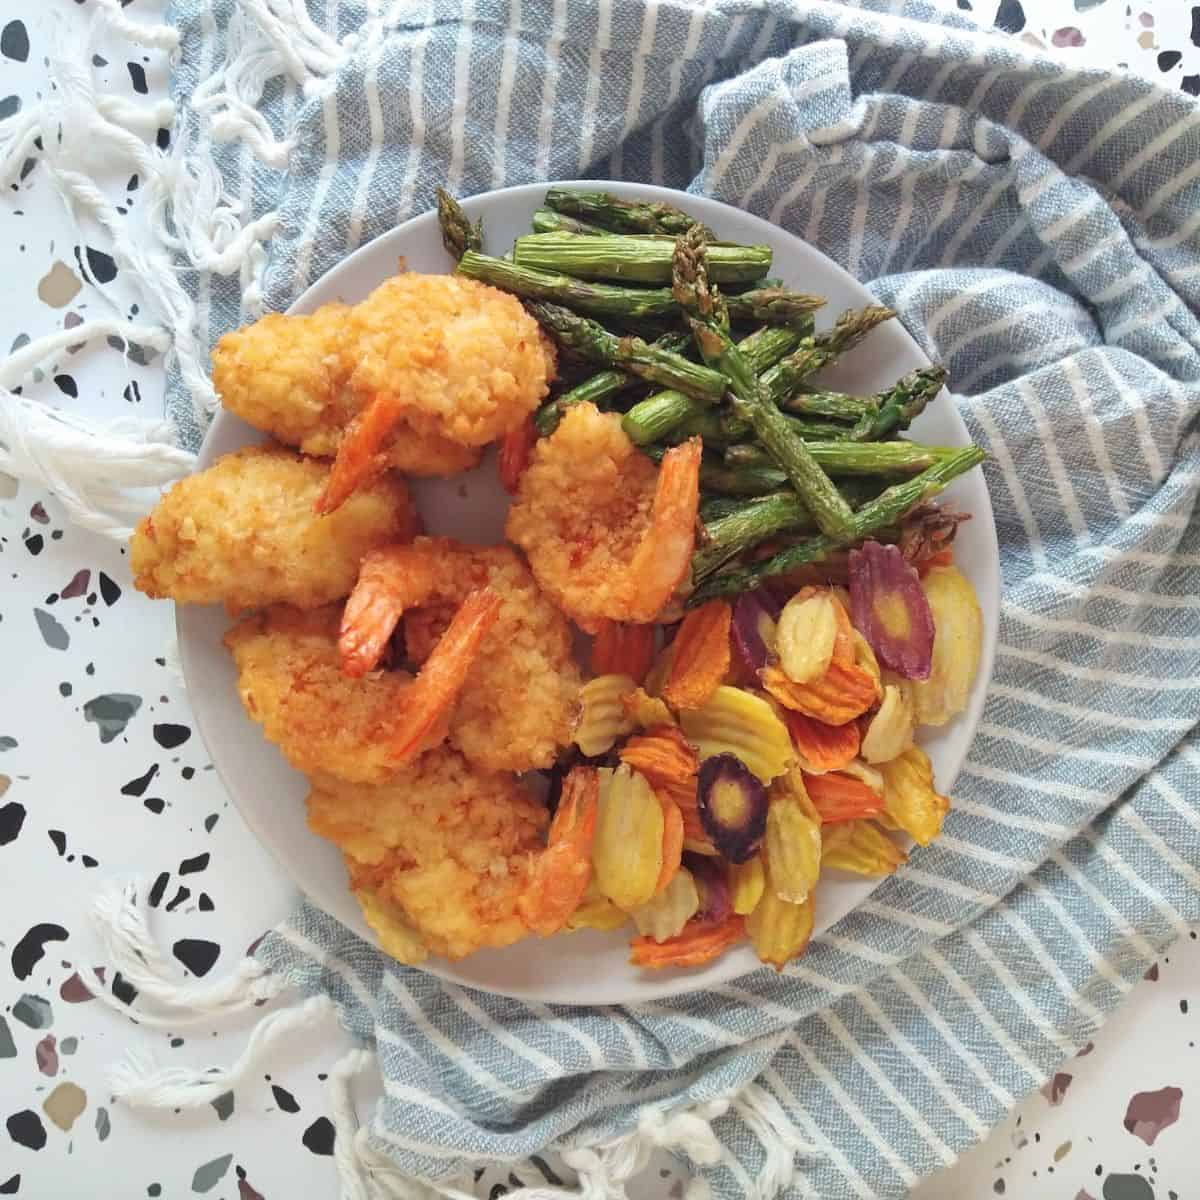 A gray plate filled with panko fried shrimp, asparagus and colorful crinkle cut carrots. The plate is on a gray striped towel that is on a white table with colored spots.